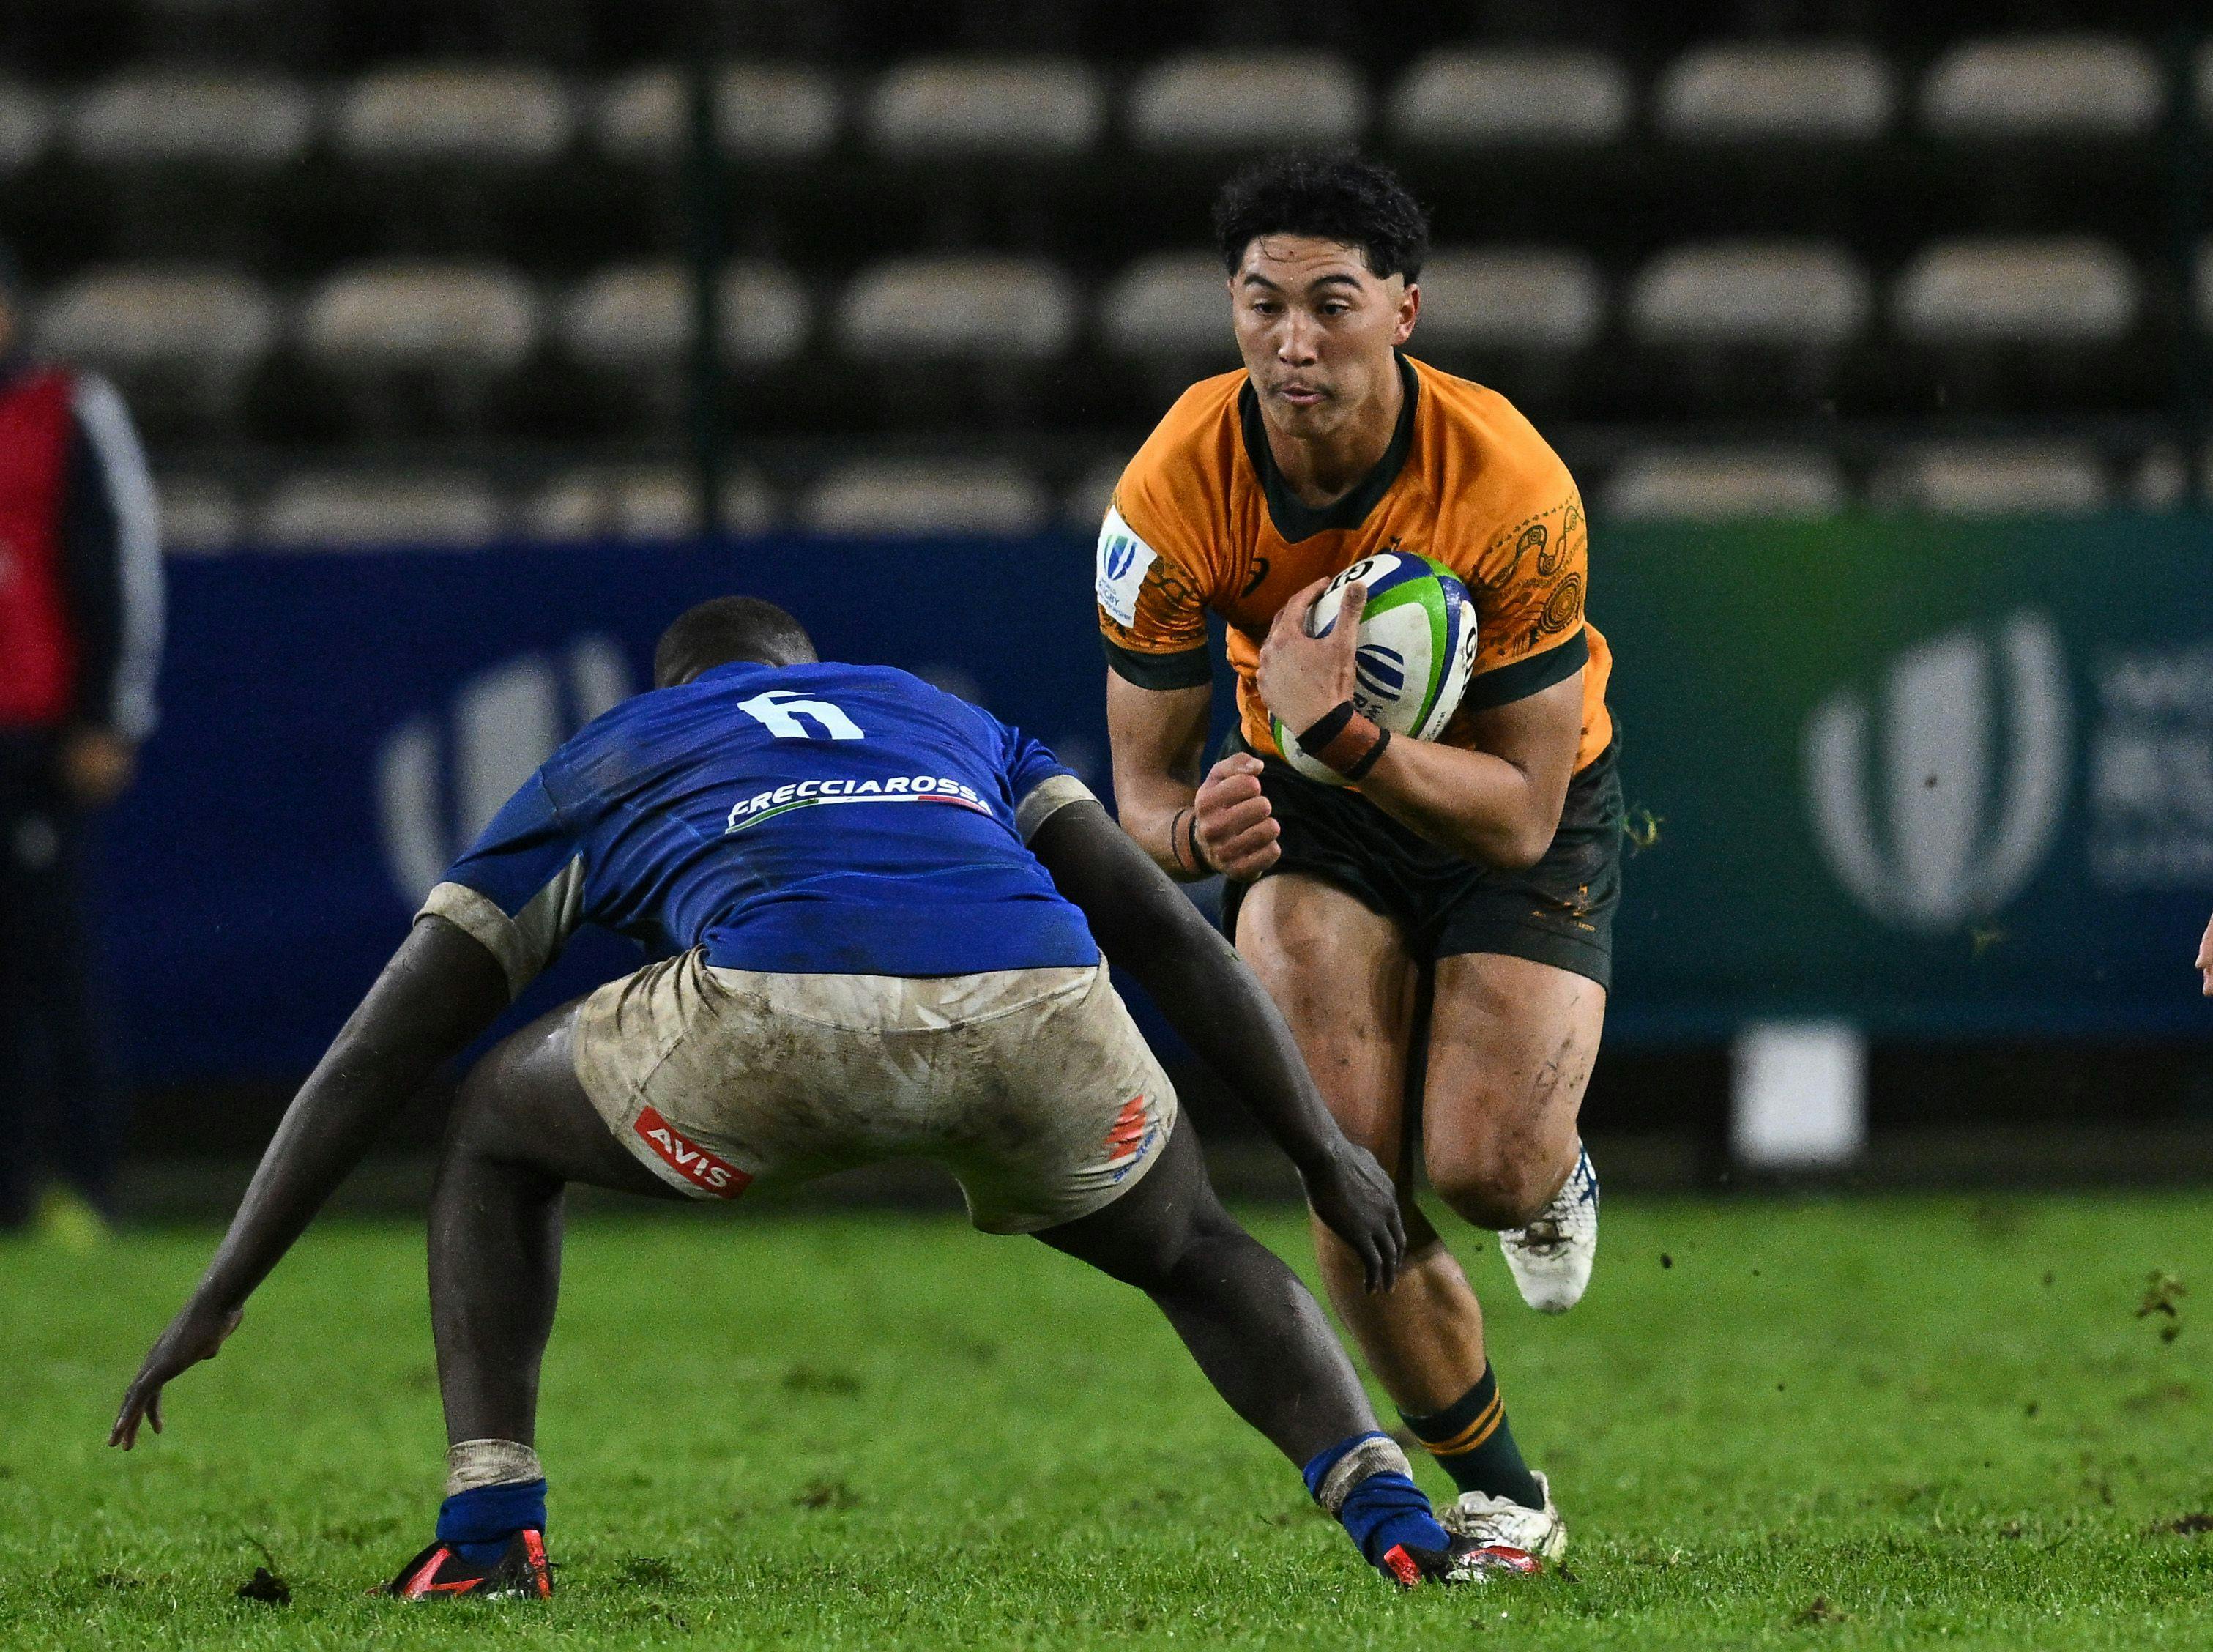 Ronan Leahy in action during Australia U20's Pool B clash with Italy at Athelone Sports Stadium, Cape Town. Picture: World Rugby